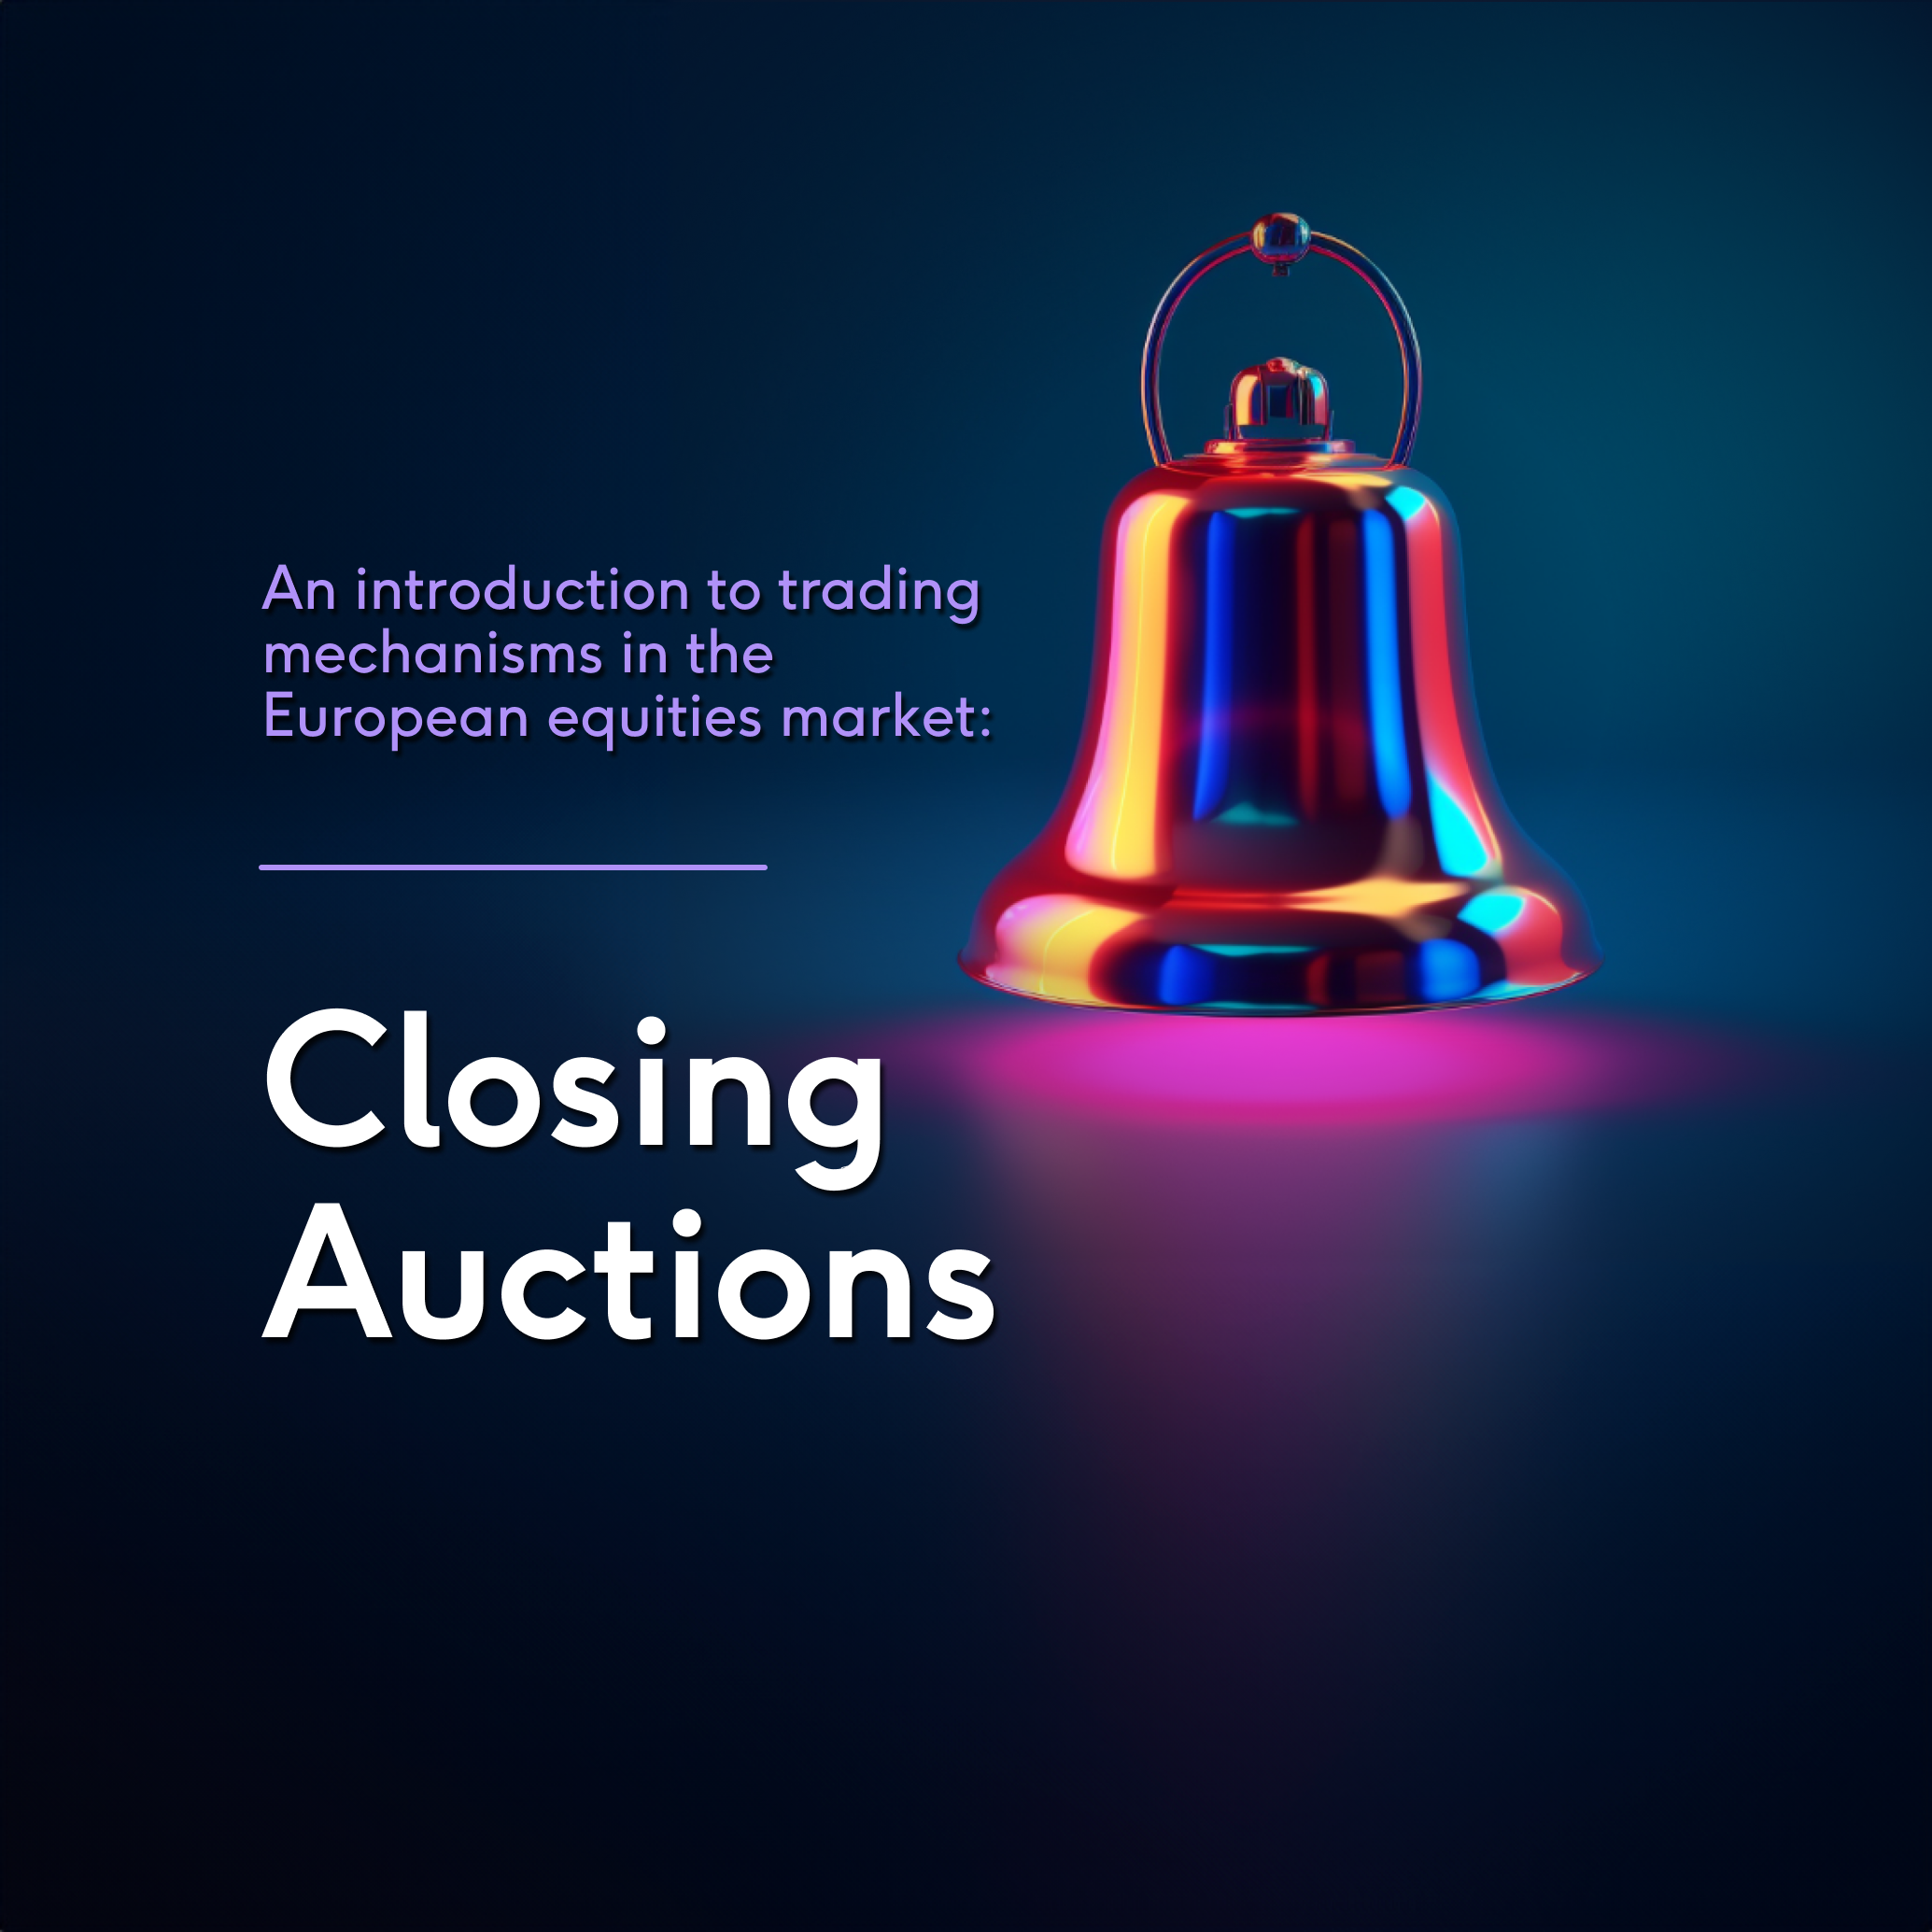 Introduction to trading mechanisms in the European equities market: Closing Auctions